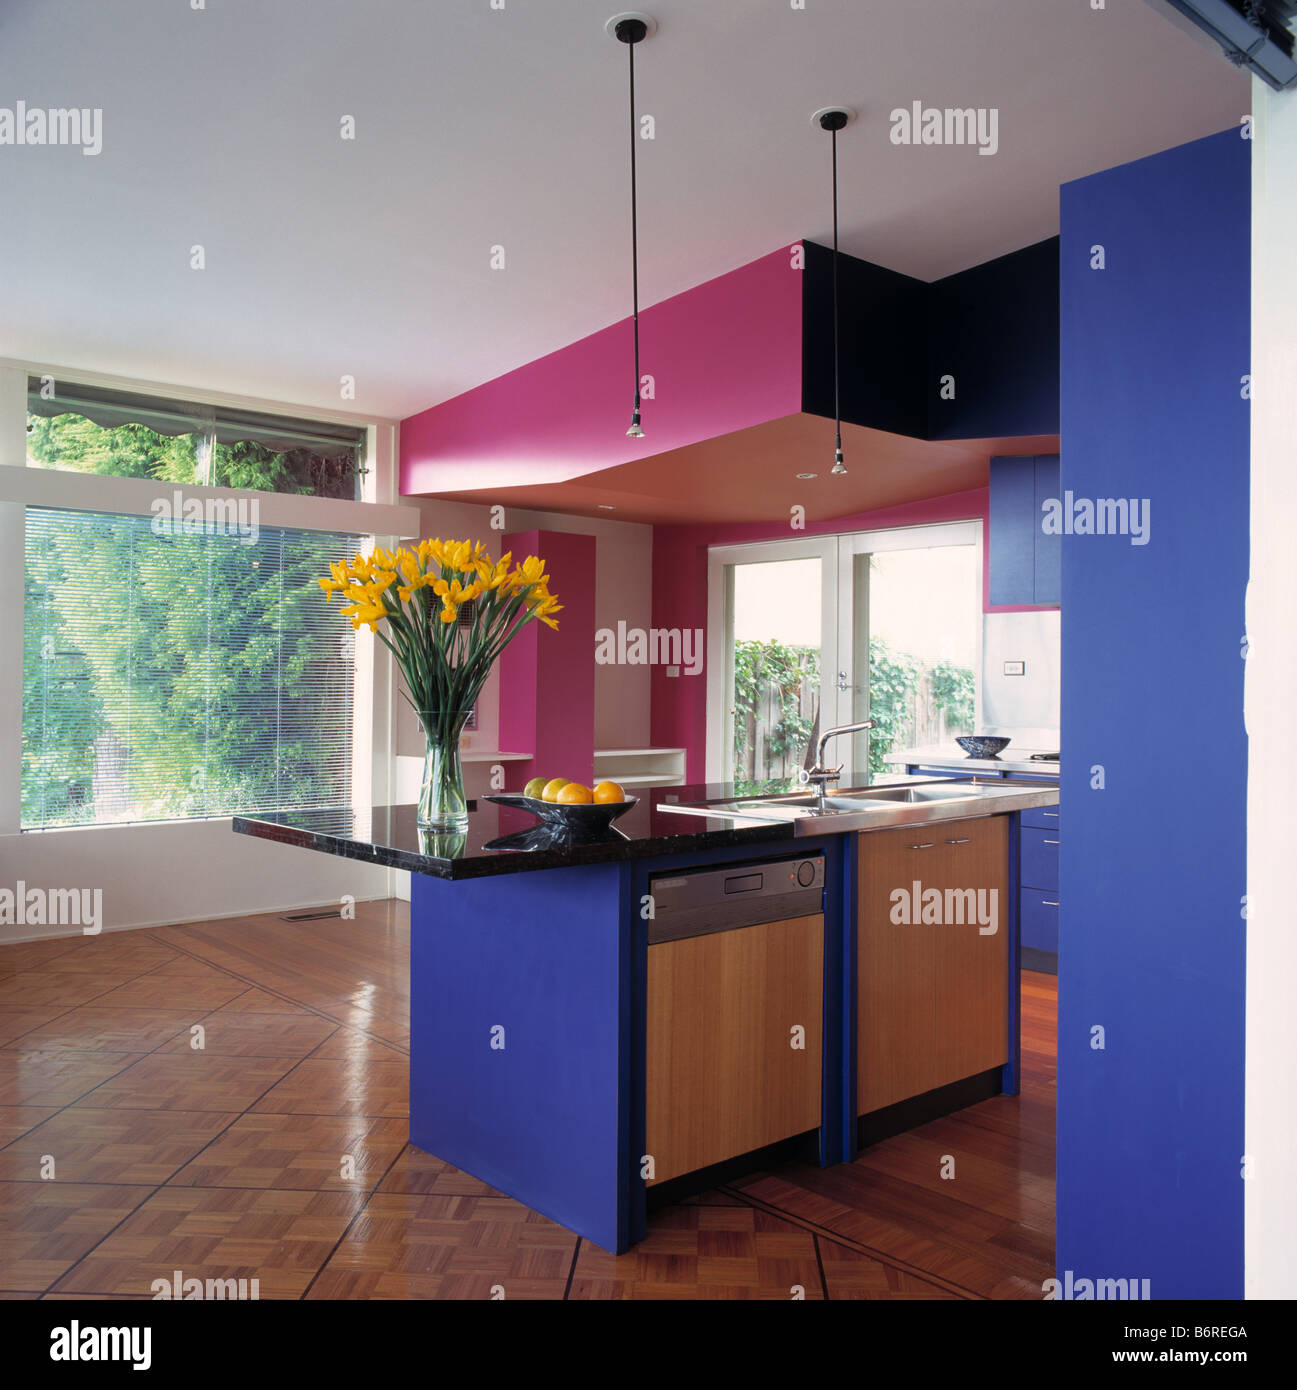 Bright Pink False Ceiling Above Fitted Dishwasher And Fridge